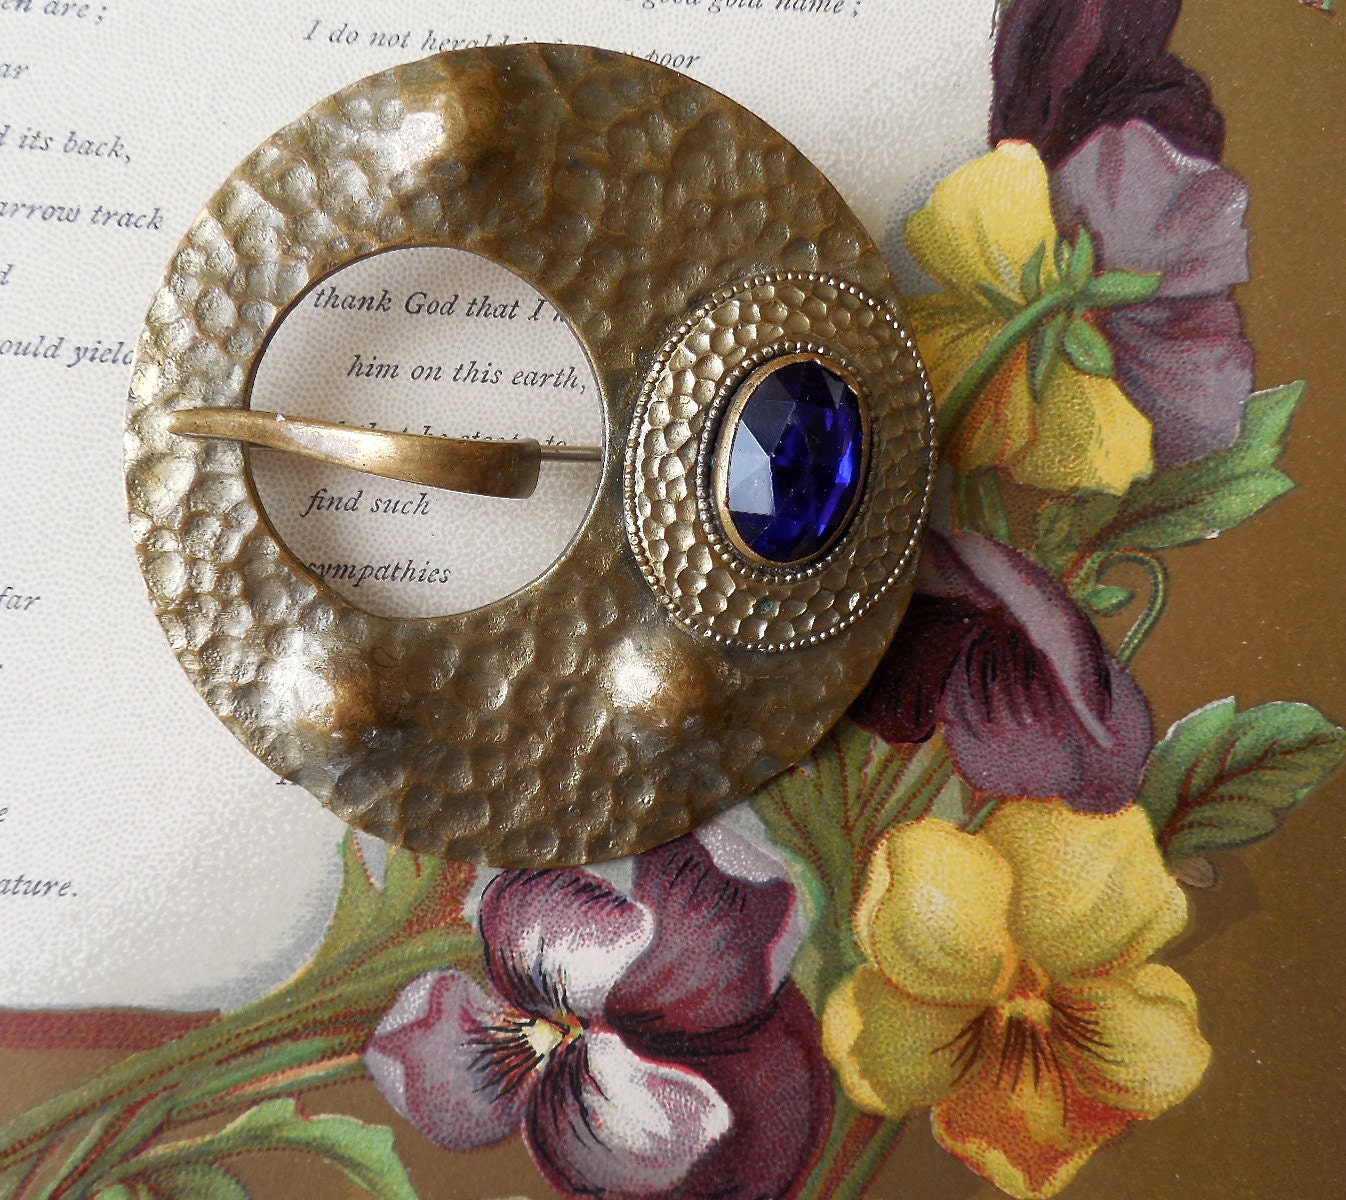 Vintage Brooch Blue Cabochon and Gold Metal Victorian Jewelry 